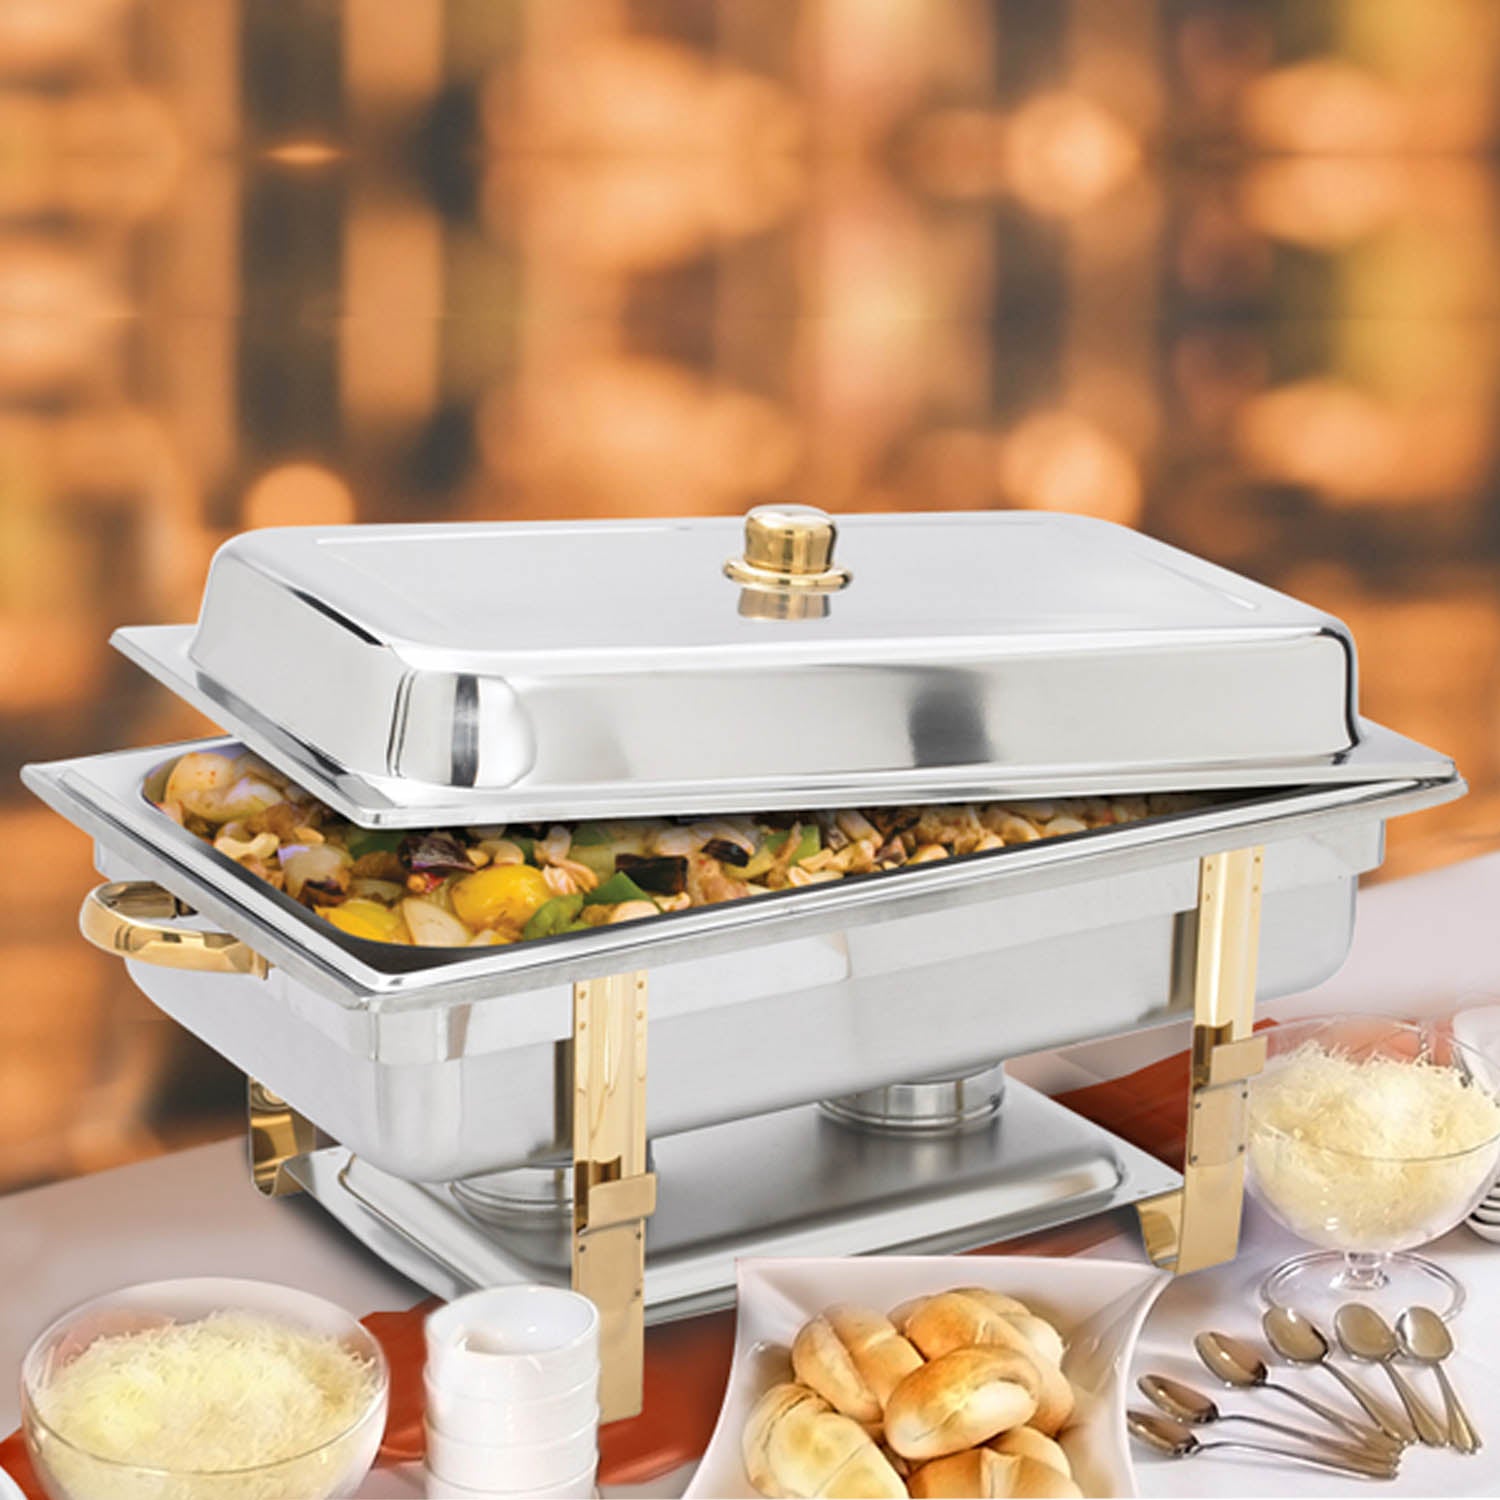 the malibu chafing dish is the perfect addition to any get together It can hold up to eight quarts of food and is made of stainless steel durable and easy to clean chafing dish deluxe set for catering large gatherings dining easy refills transportation dent rust resistant safe for food keeps food warm for longer